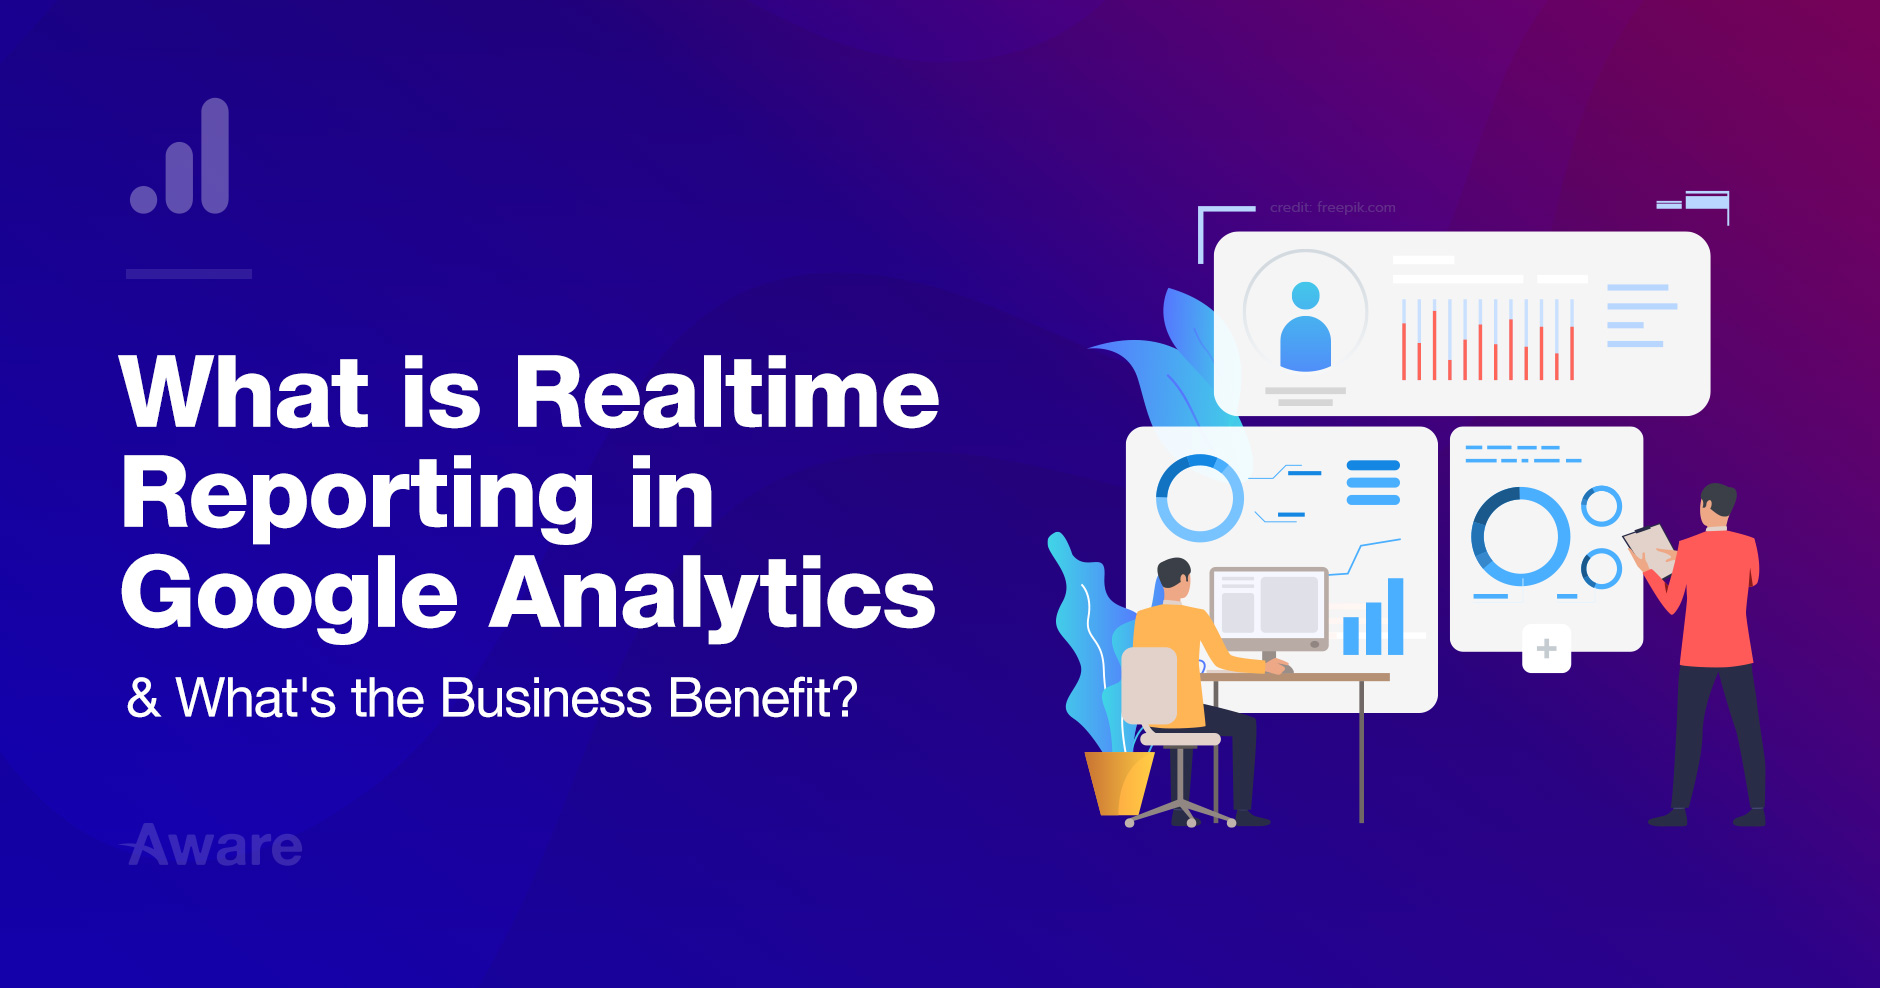 What is Realtime Reporting in Google Analytics & What's the Real Business Benefit?